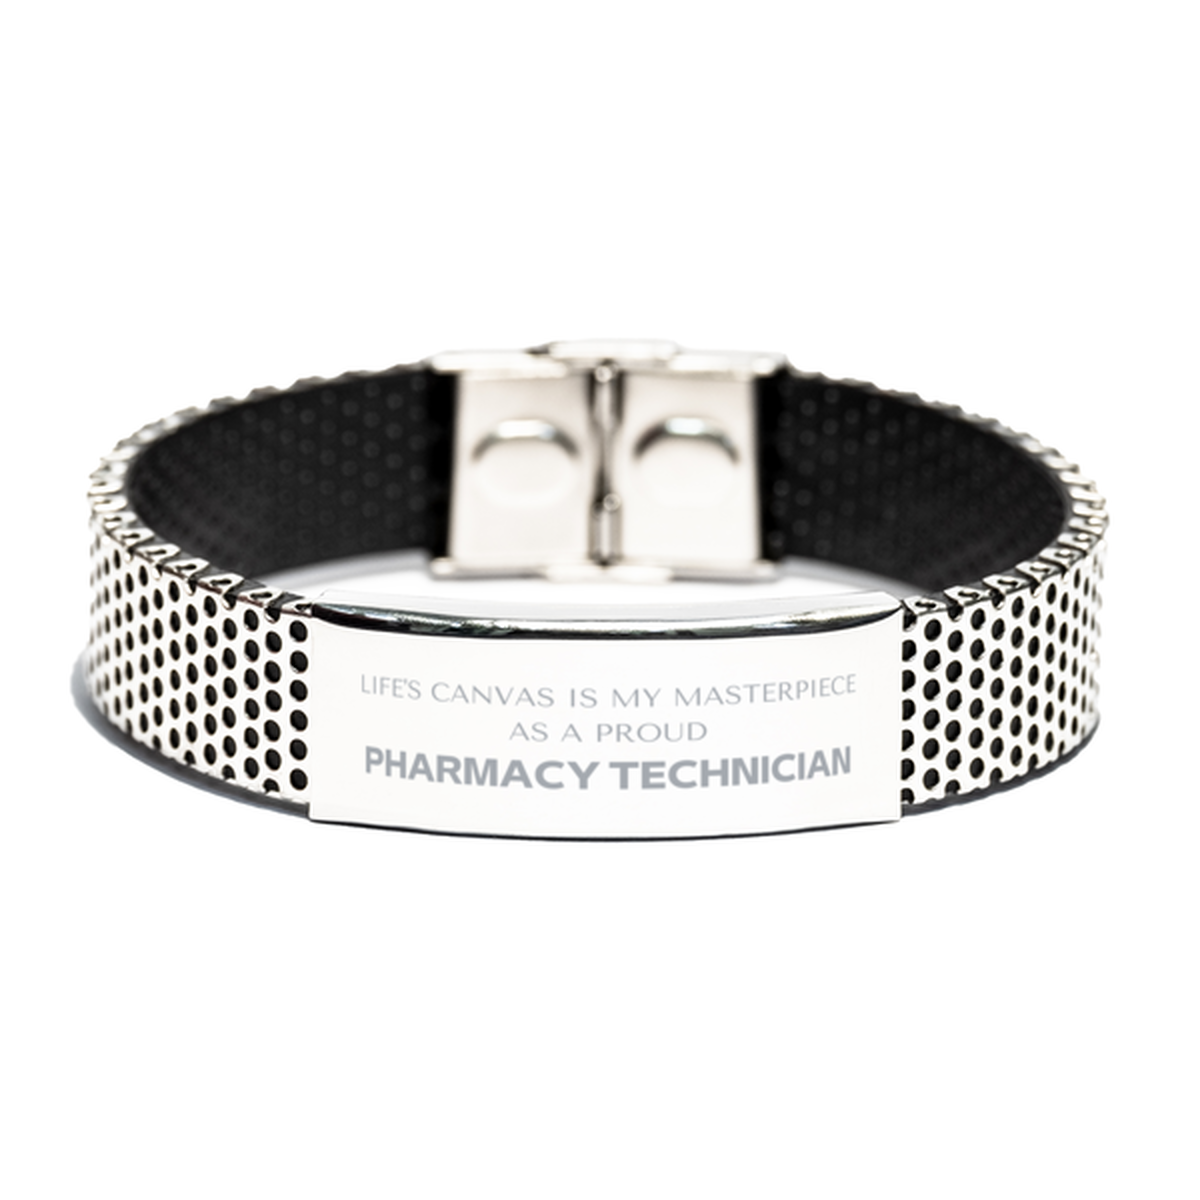 Proud Pharmacy Technician Gifts, Life's canvas is my masterpiece, Epic Birthday Christmas Unique Stainless Steel Bracelet For Pharmacy Technician, Coworkers, Men, Women, Friends